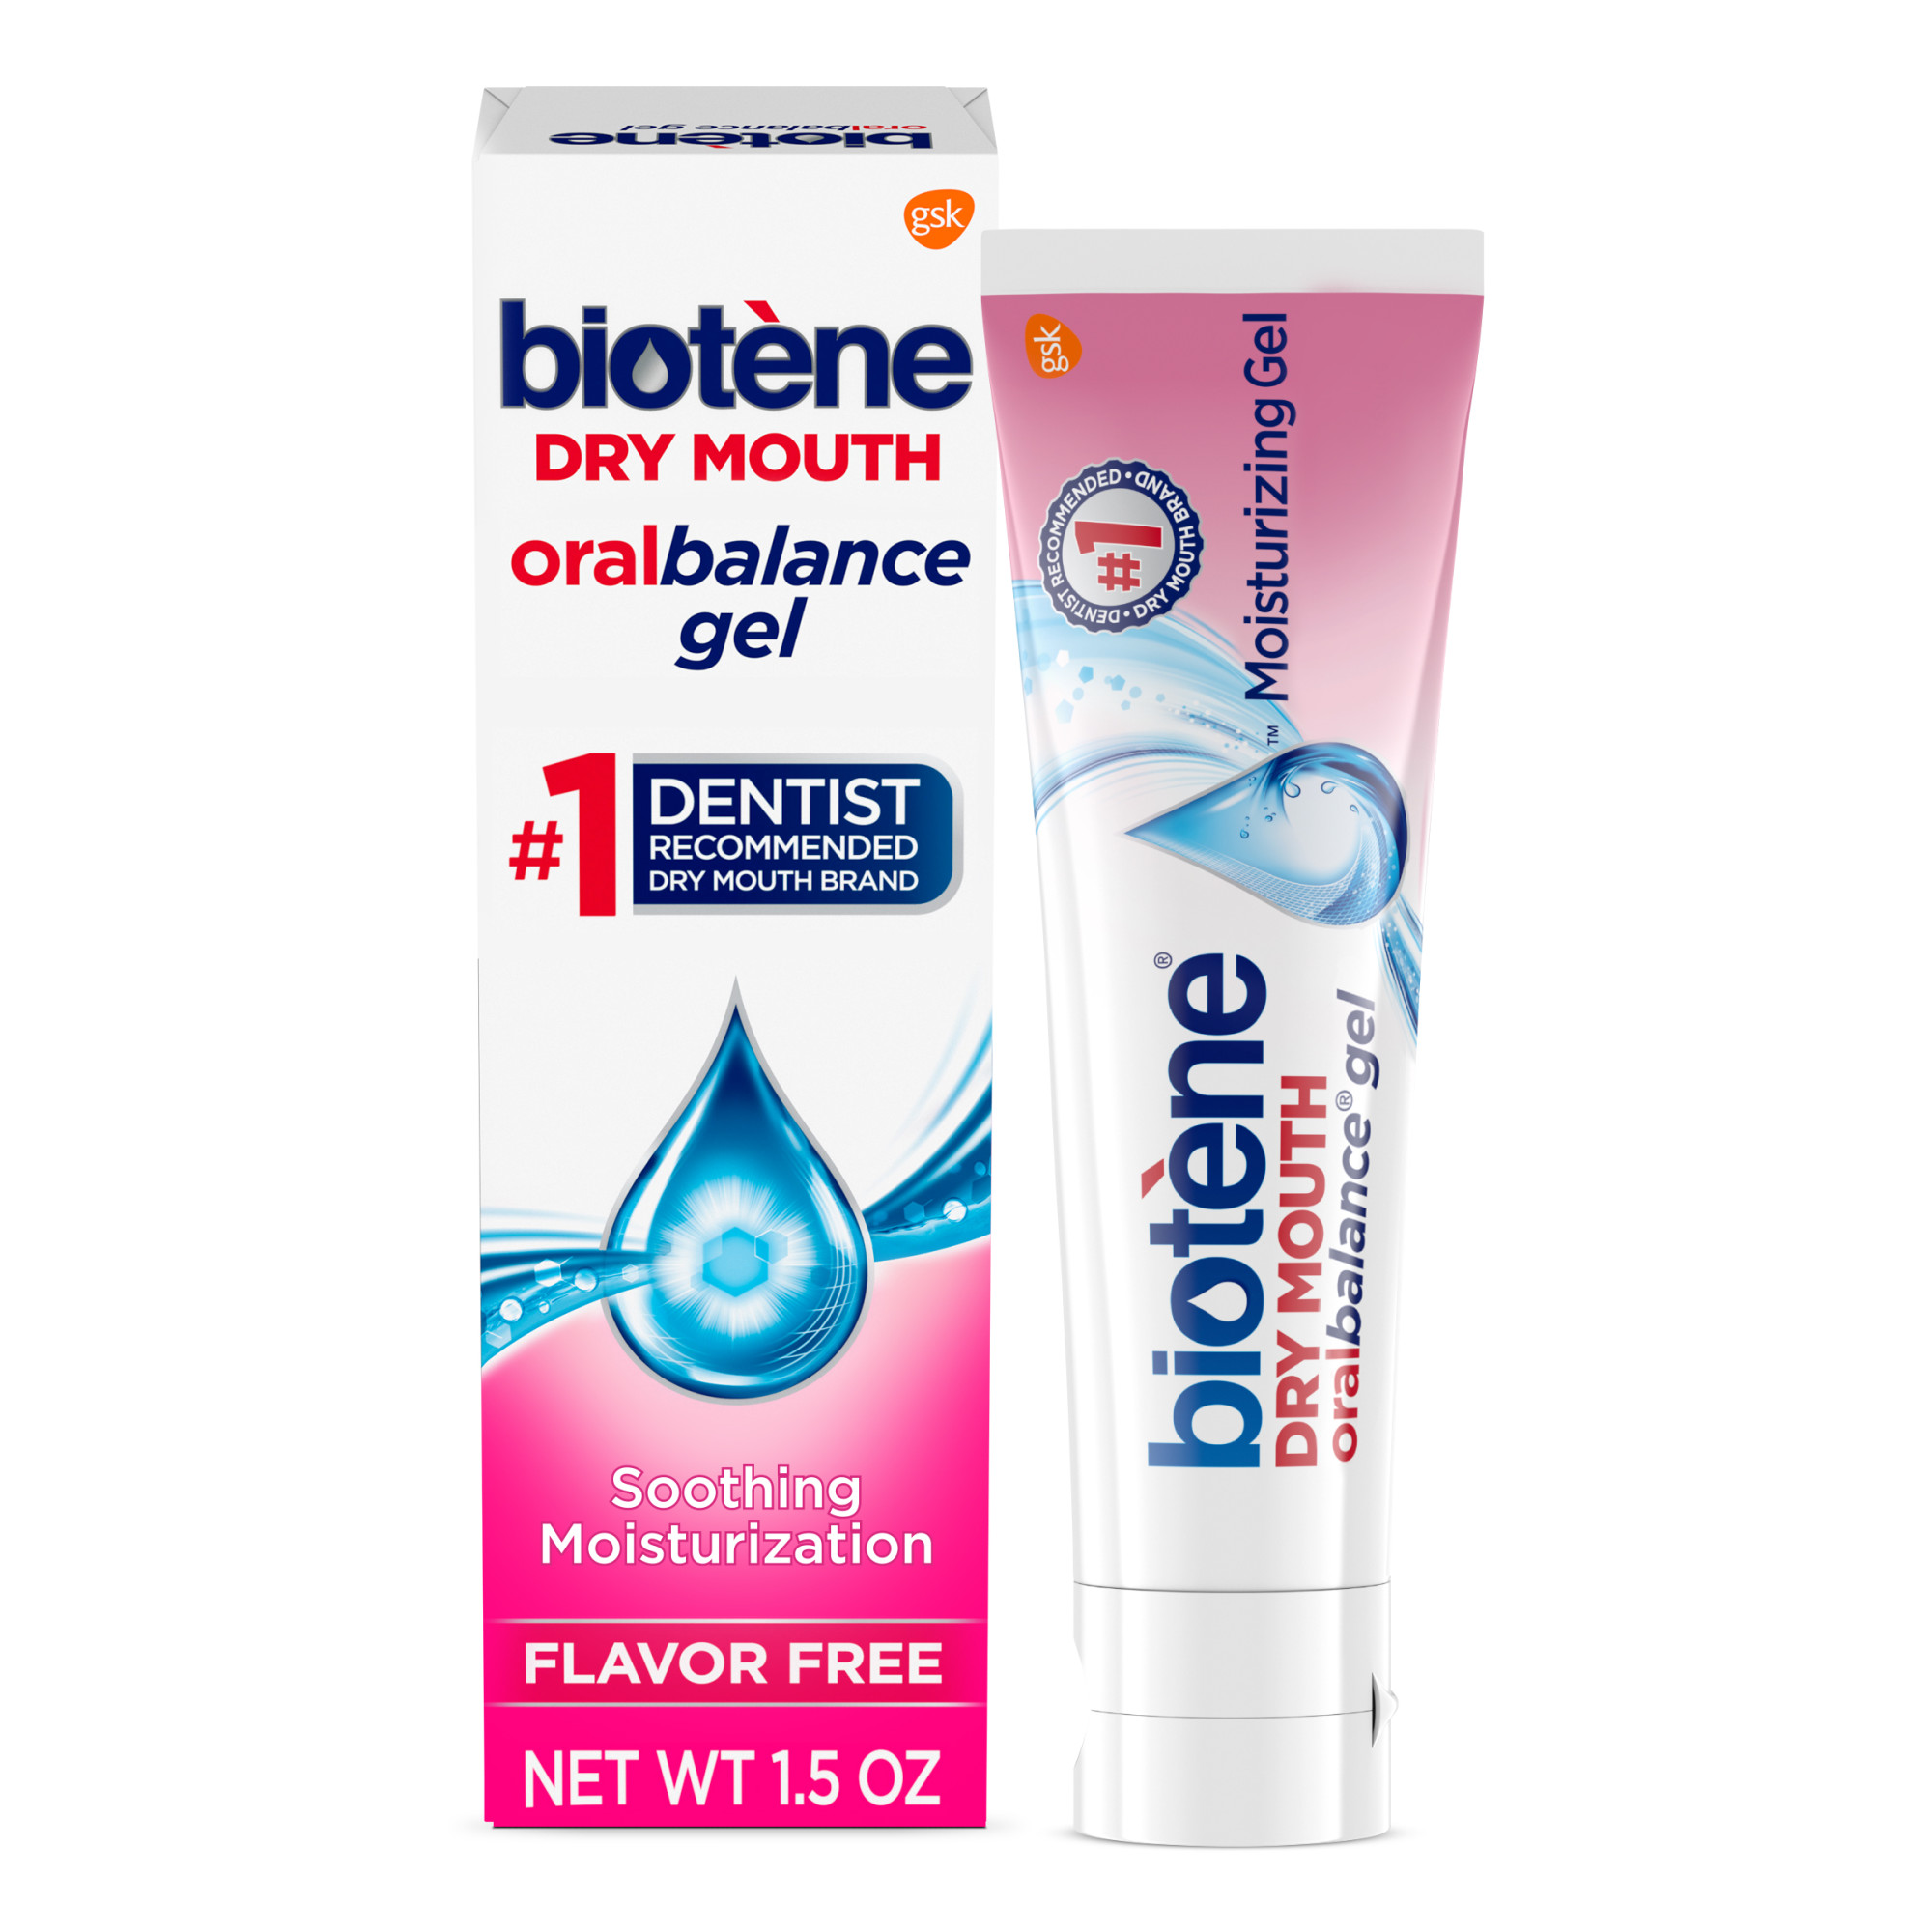 Biotene Oralbalance Alcohol Free Dry Mouth Moisturizing Gel, Unflavored, 1.5 oz, for Adults - image 1 of 12